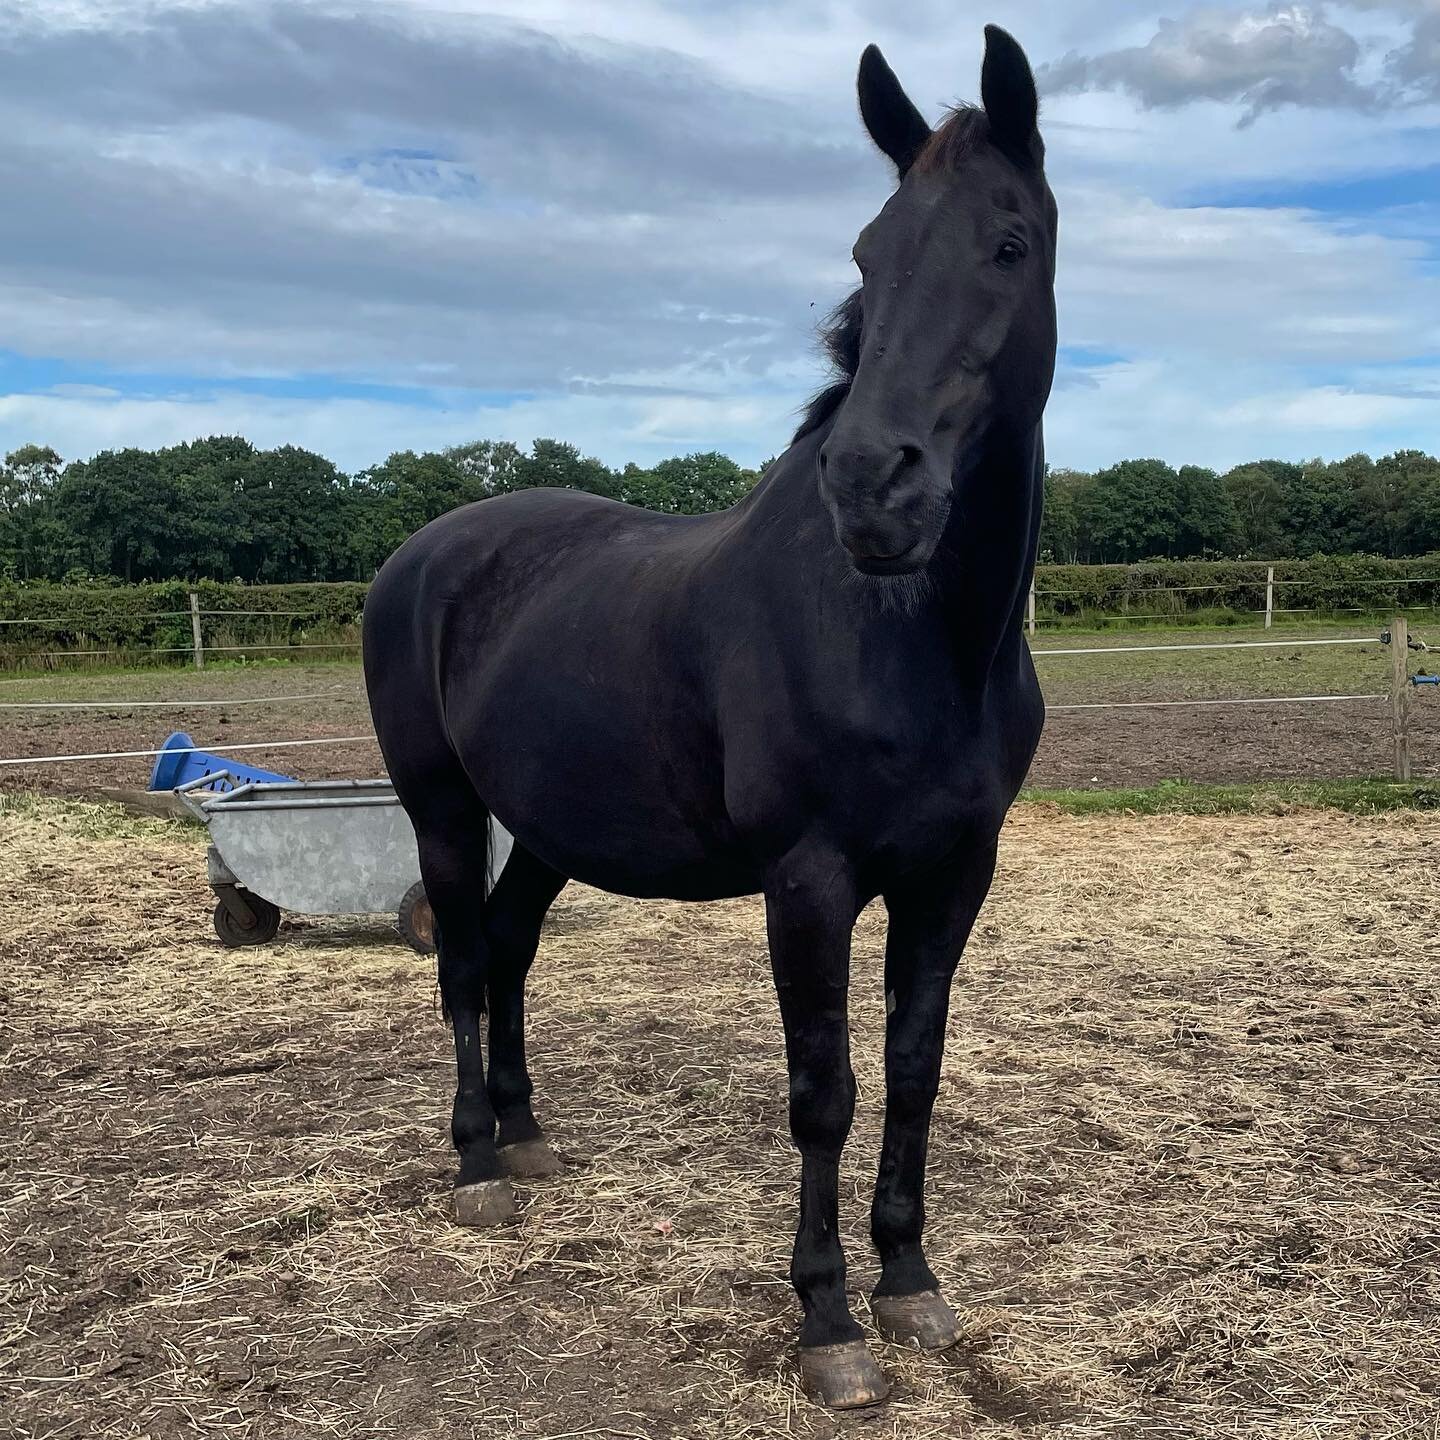 ⭐️ 𝐈𝐧𝐭𝐫𝐨𝐝𝐮𝐜𝐢𝐧𝐠 . . . Ben! The largest here at Birtles Equestrian, and one of the loveliest! He's a bit of a goofball, but definitely a lovely mover. He's got heaps of personality and he's definitely not afraid to show it on the yard! ⭐️ #p